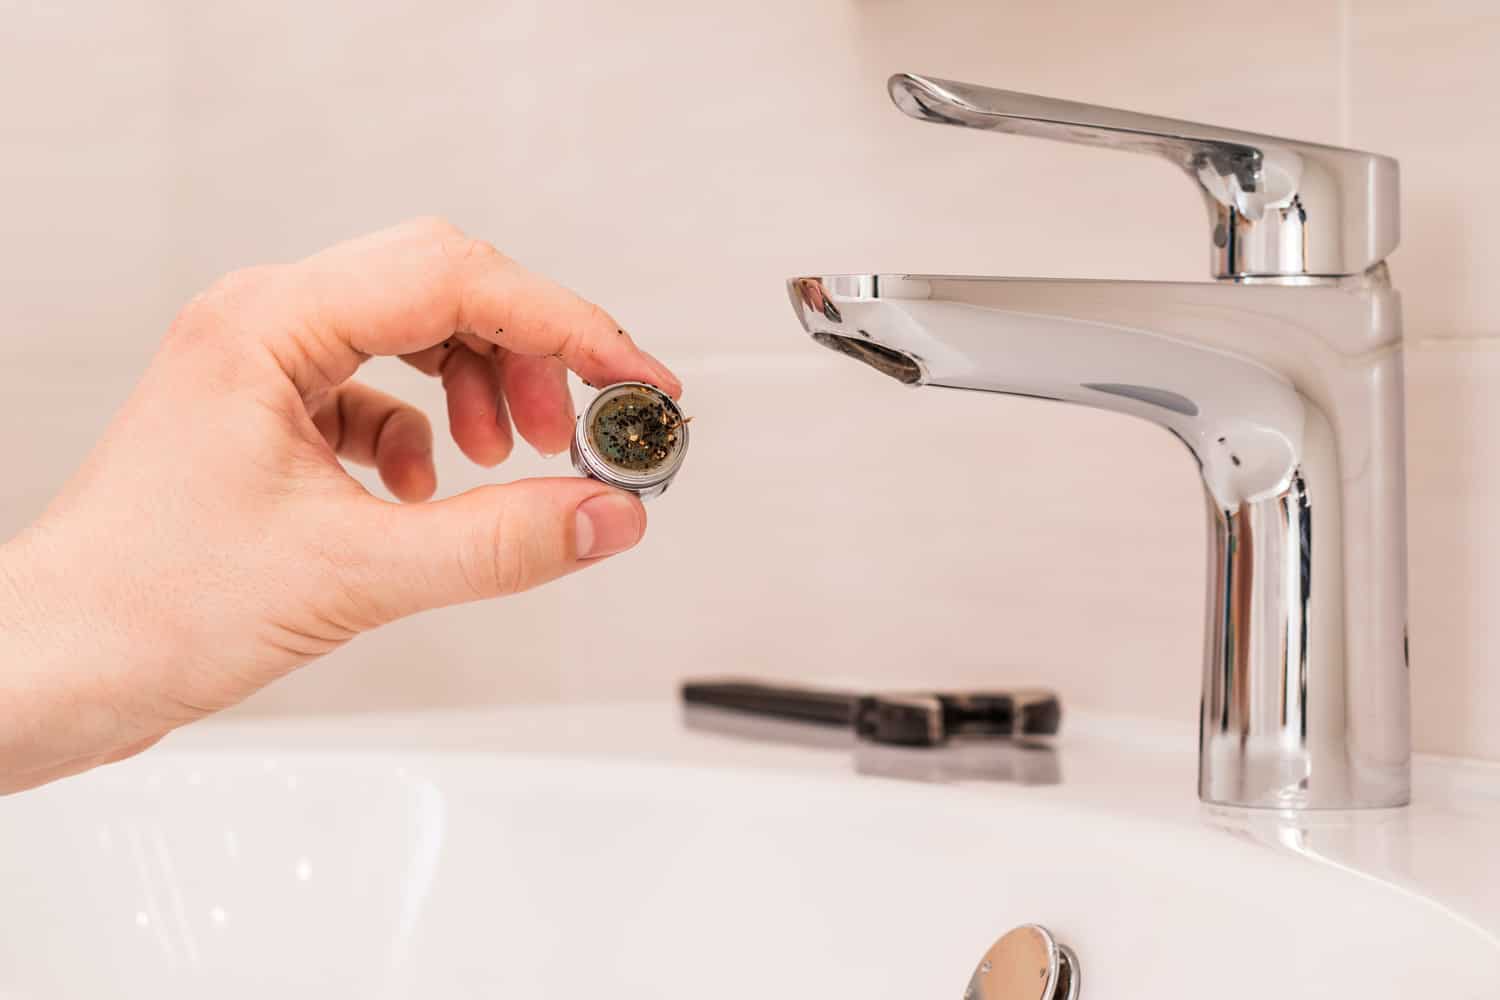 Faucet cleaning. Person's hand holds a clogged aerator. Sediment in water